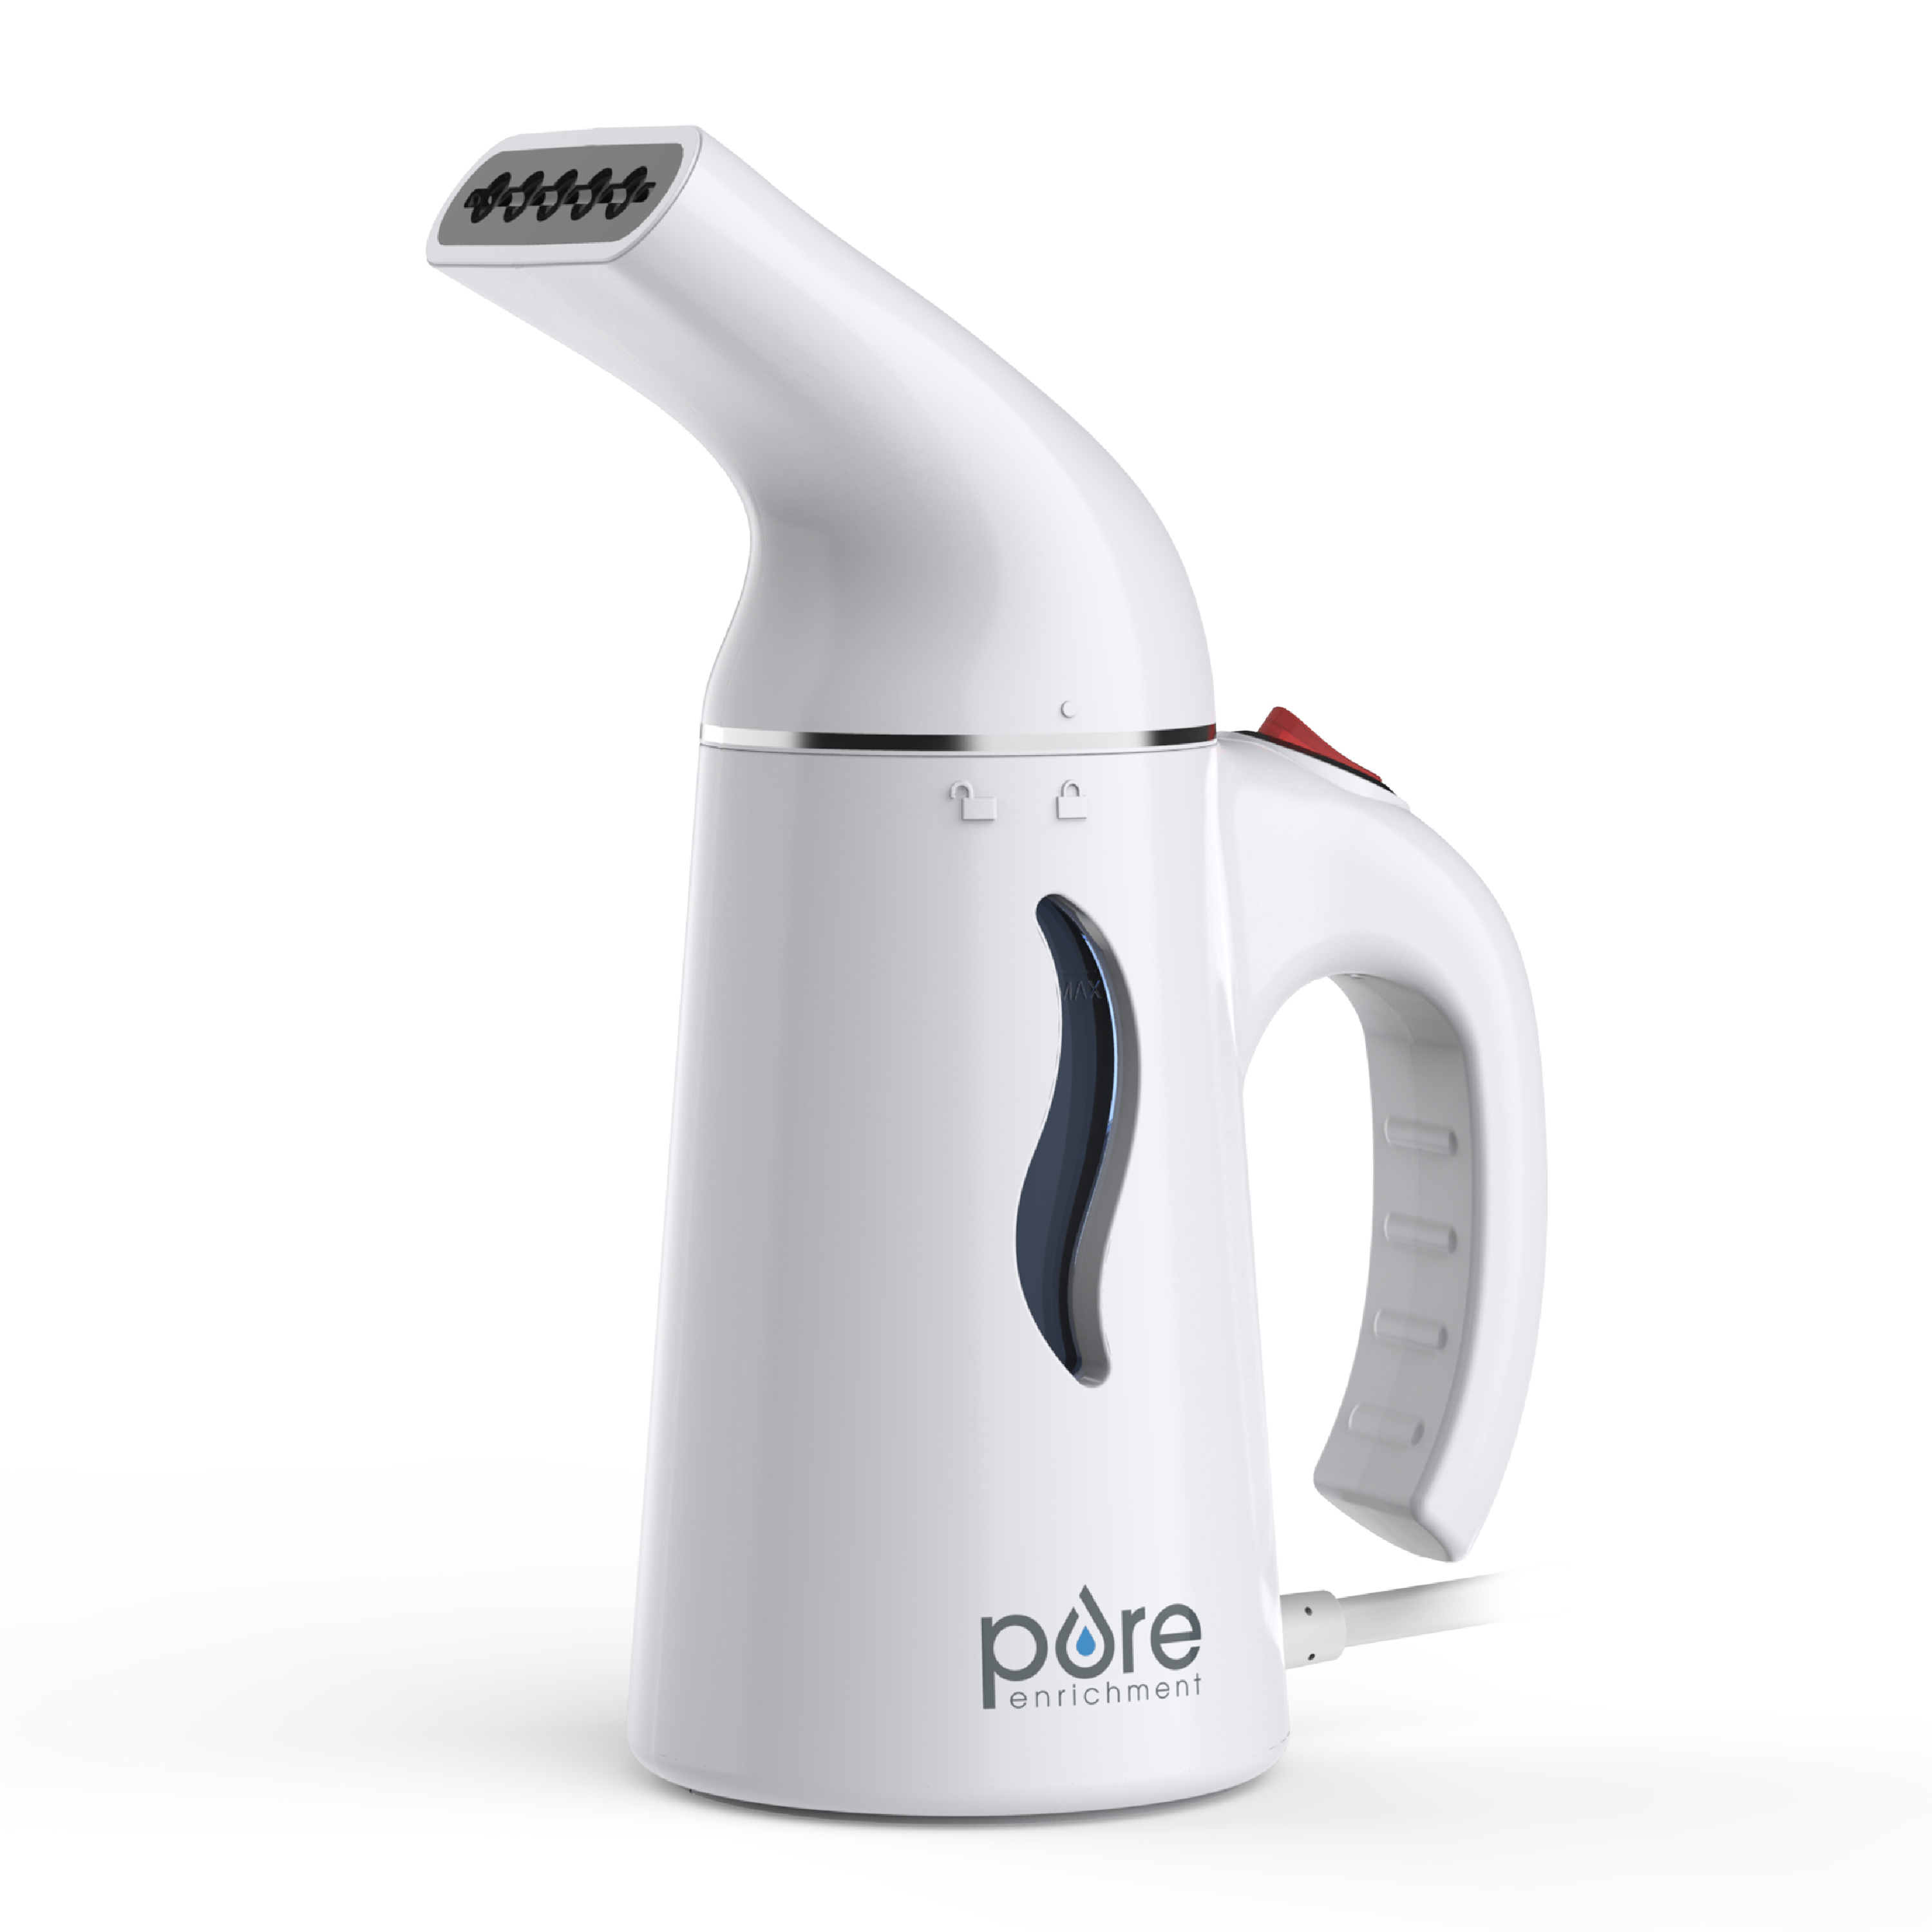 Pure Enrichment® PureSteam™ Portable Fabric Steamer- Fast-Heating Clothes Steamer with Ergonomic Handle and Easy-Fill Water Tank for 10 Minutes of Continuous Steam - Ideal for Home or Travel (Black) - image 1 of 8